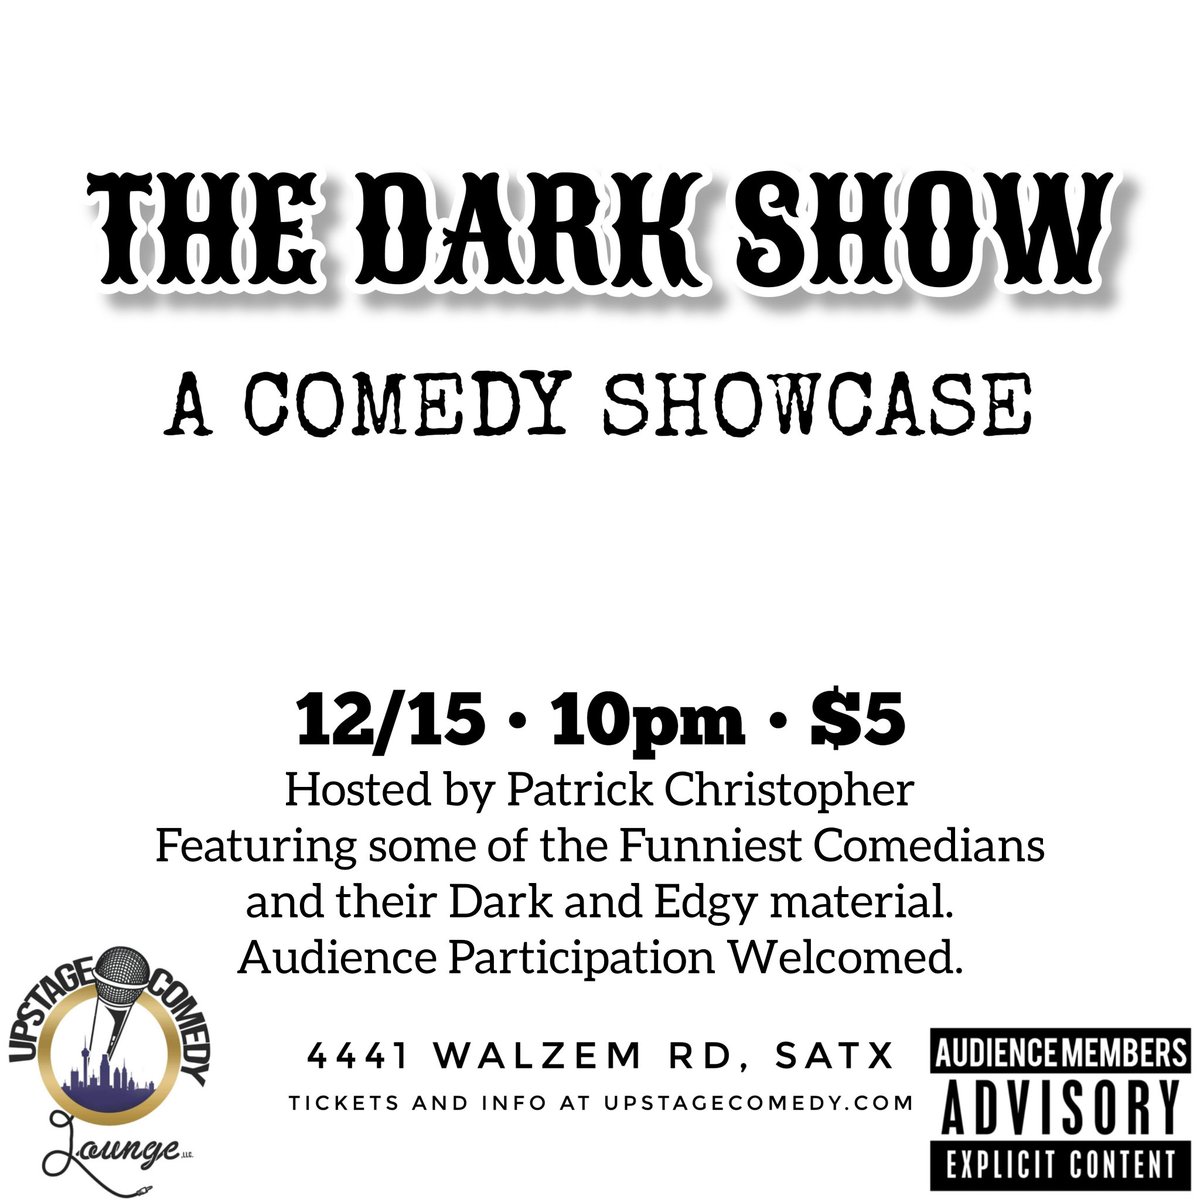 TONIGHT at Upstage Comedy Lounge.
THE DARK SHOW
Featuring some of the Funniest Comedians and their Dark and Edgy material. 
Audience Participation Welcomed!!!
#sanantonio #friday #night #comedyshow #sanantoniocomedy #dark #edgy #standupcomedy  #audienceparticipation #win #prizes